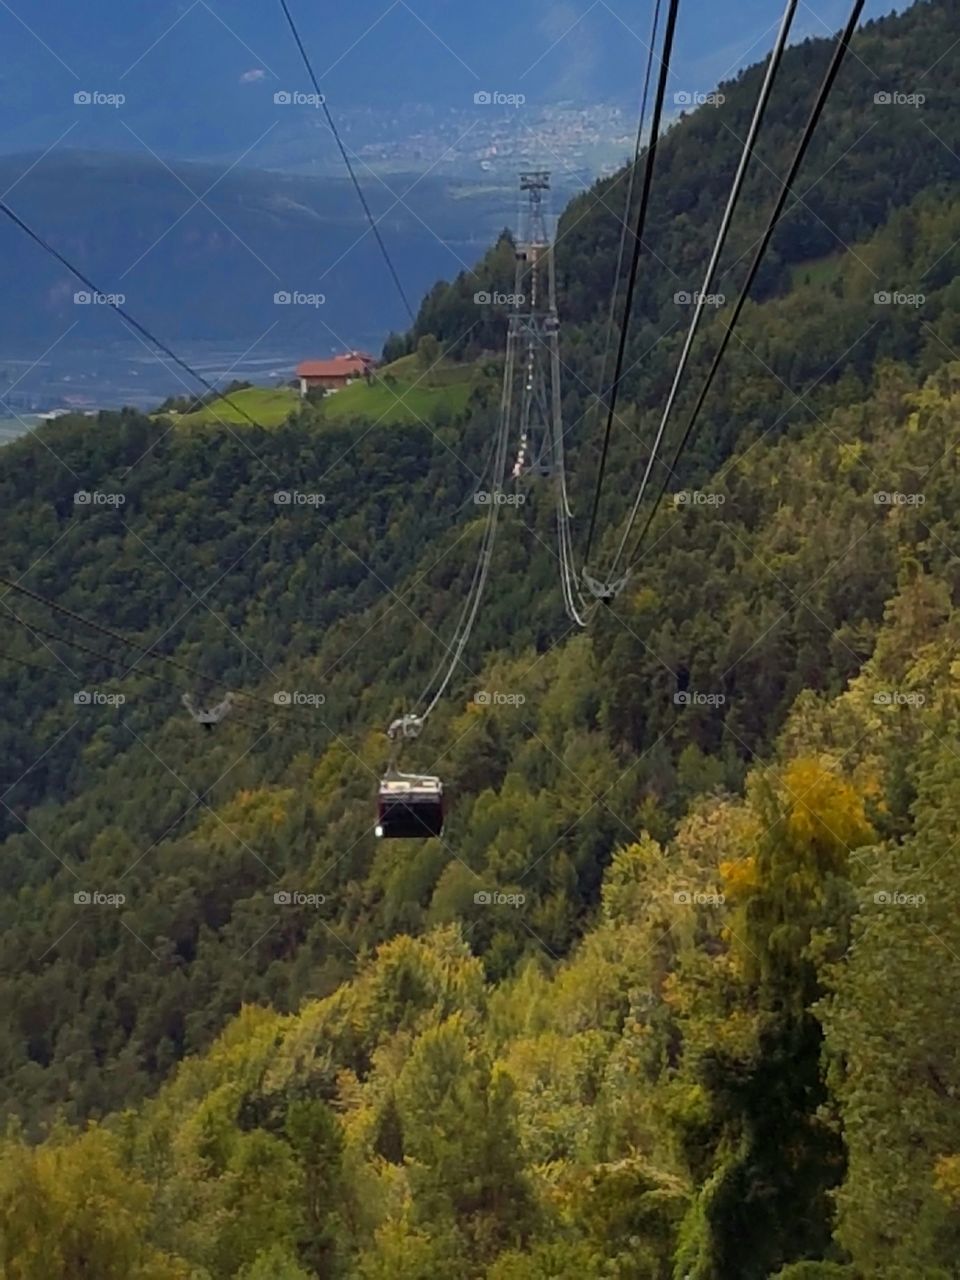 view from a cable car